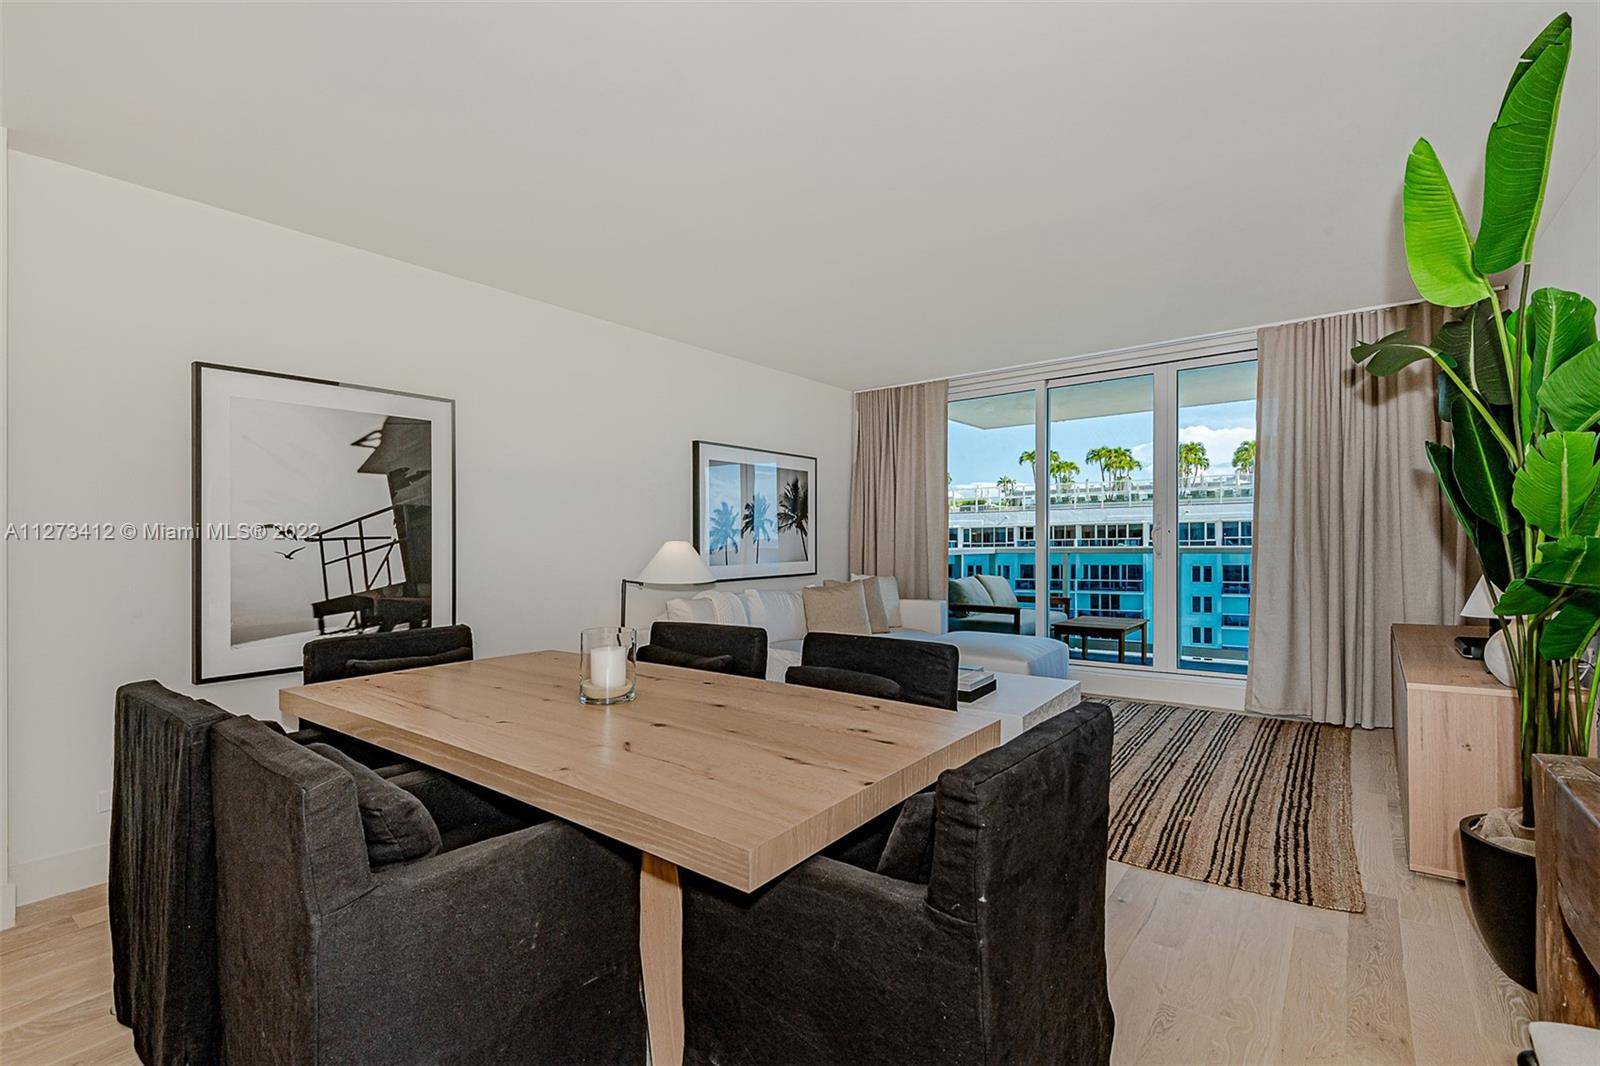 Stunning 2 bed, 2 bath oceanfront penthouse residence inside one of South Beach s premier luxury resorts.